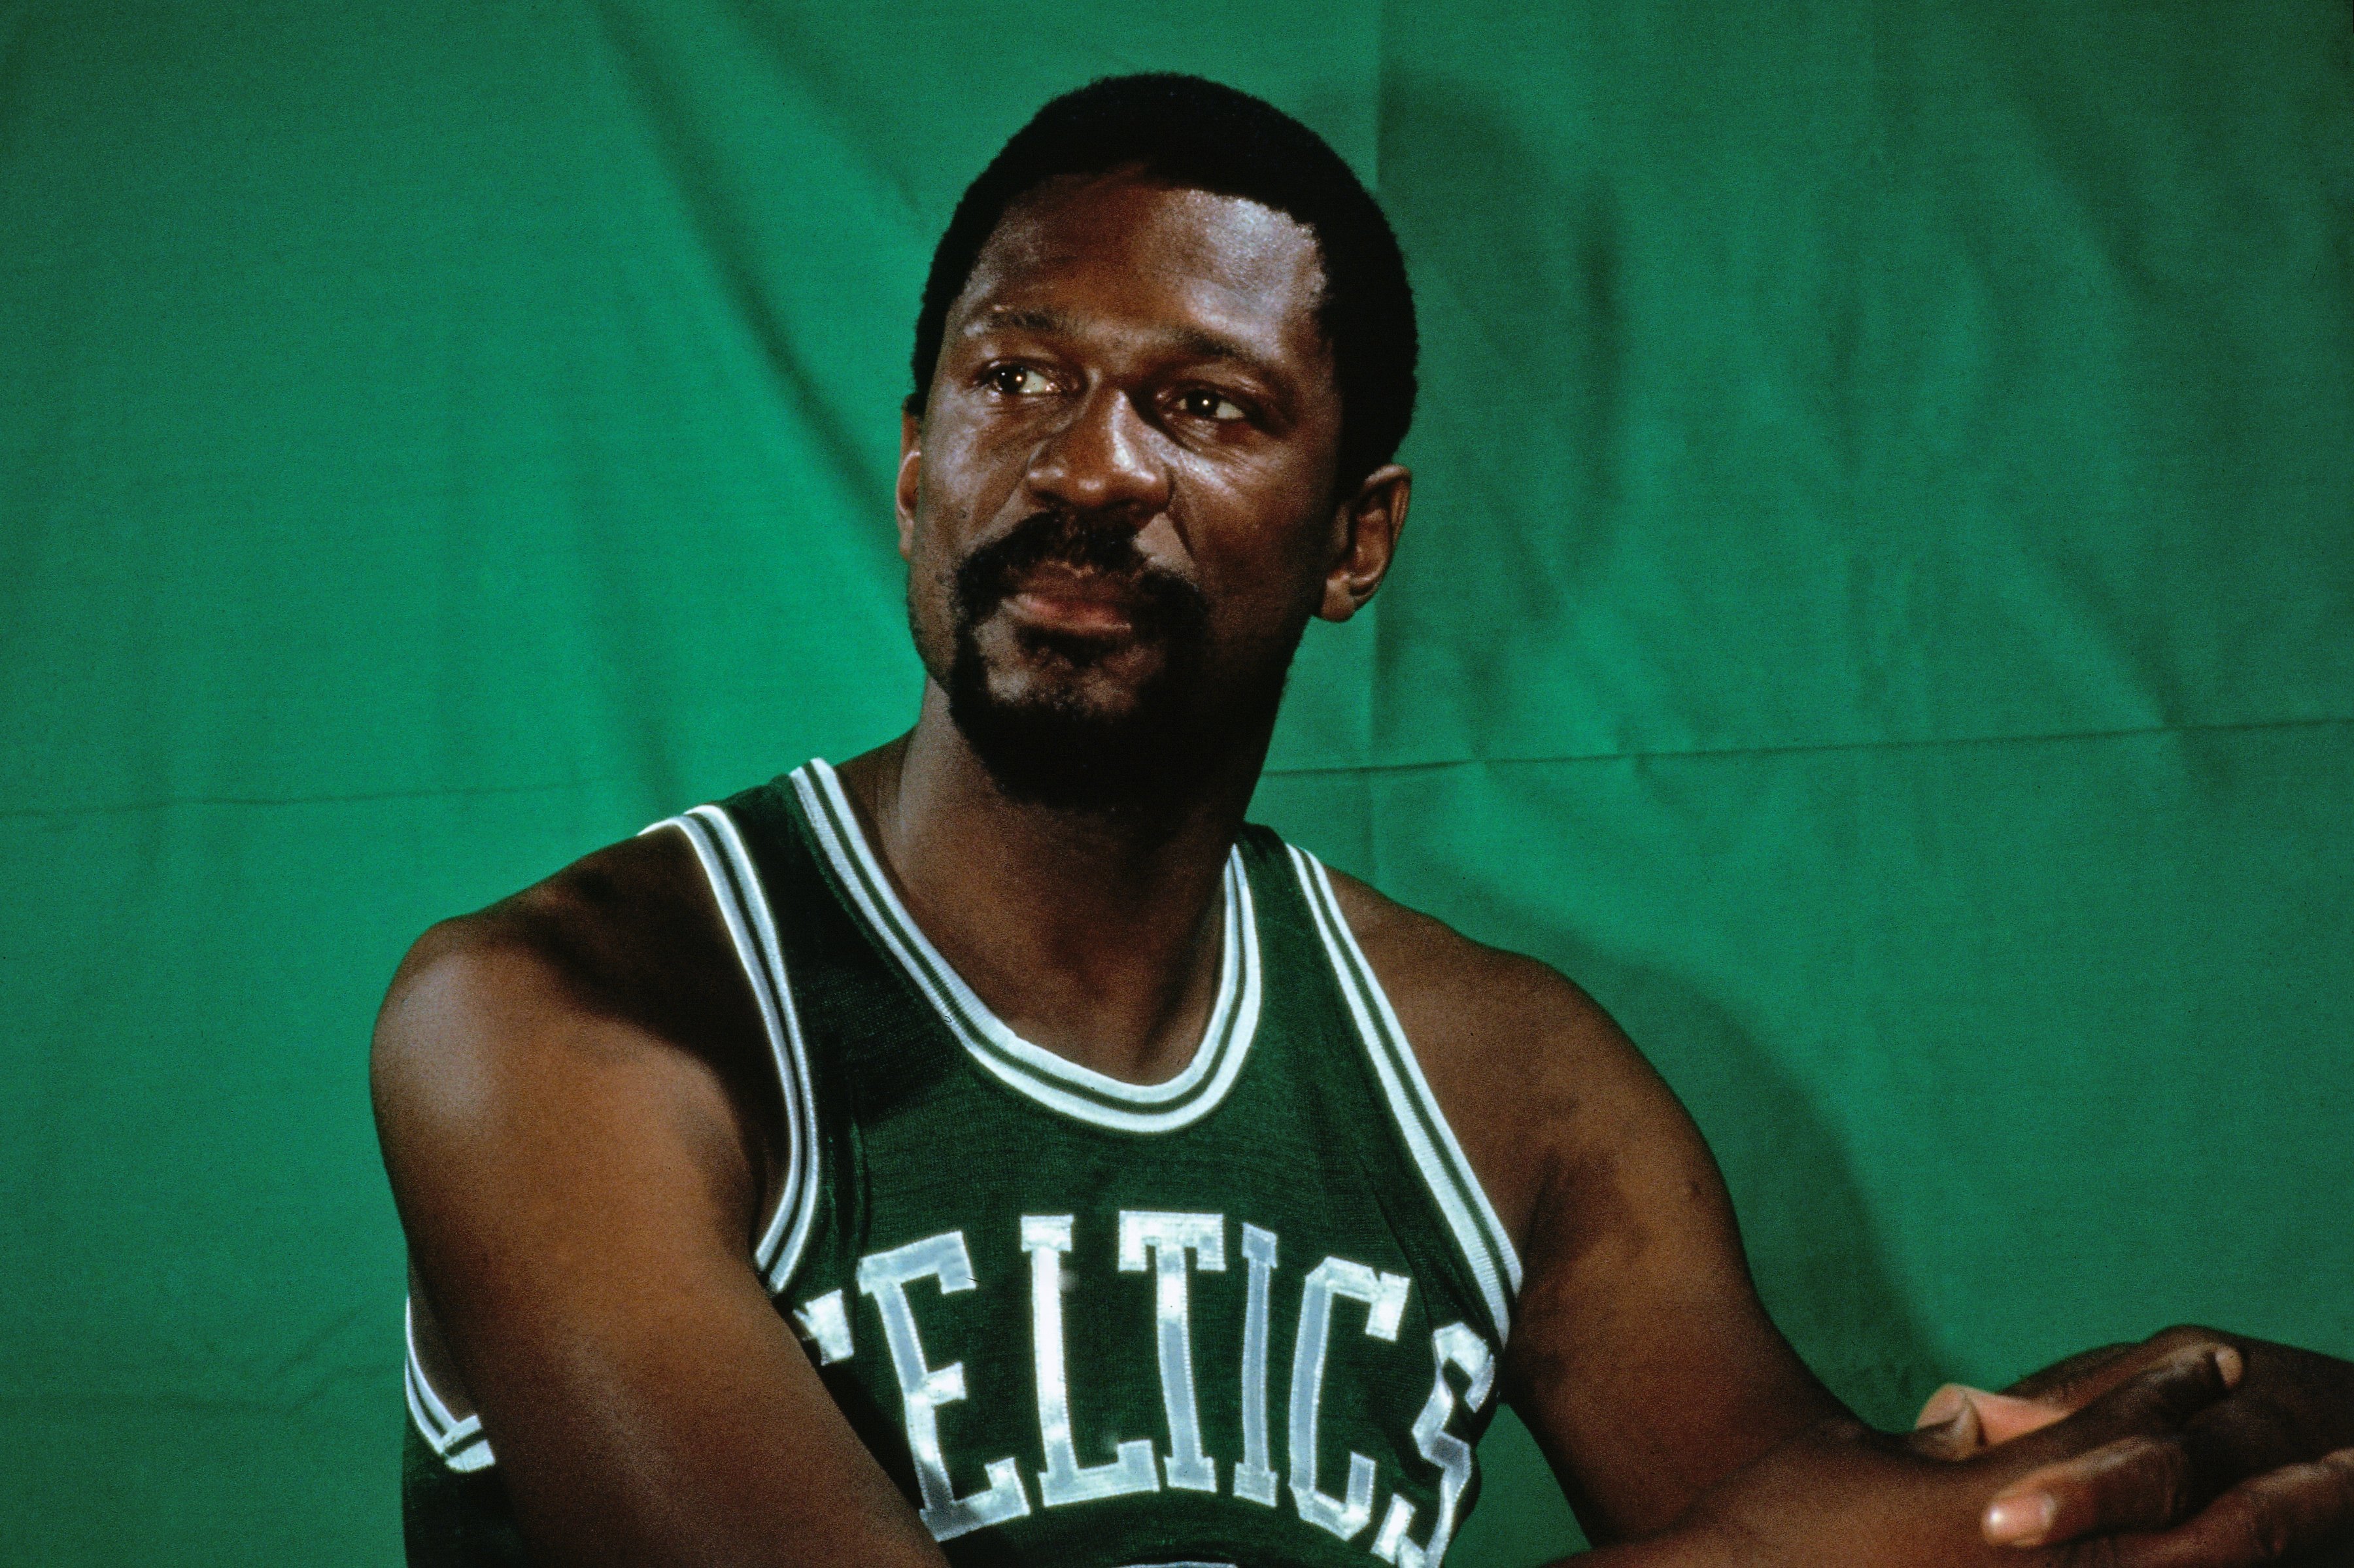 Instead of the clover and #6 to honor Bill Russell how about the